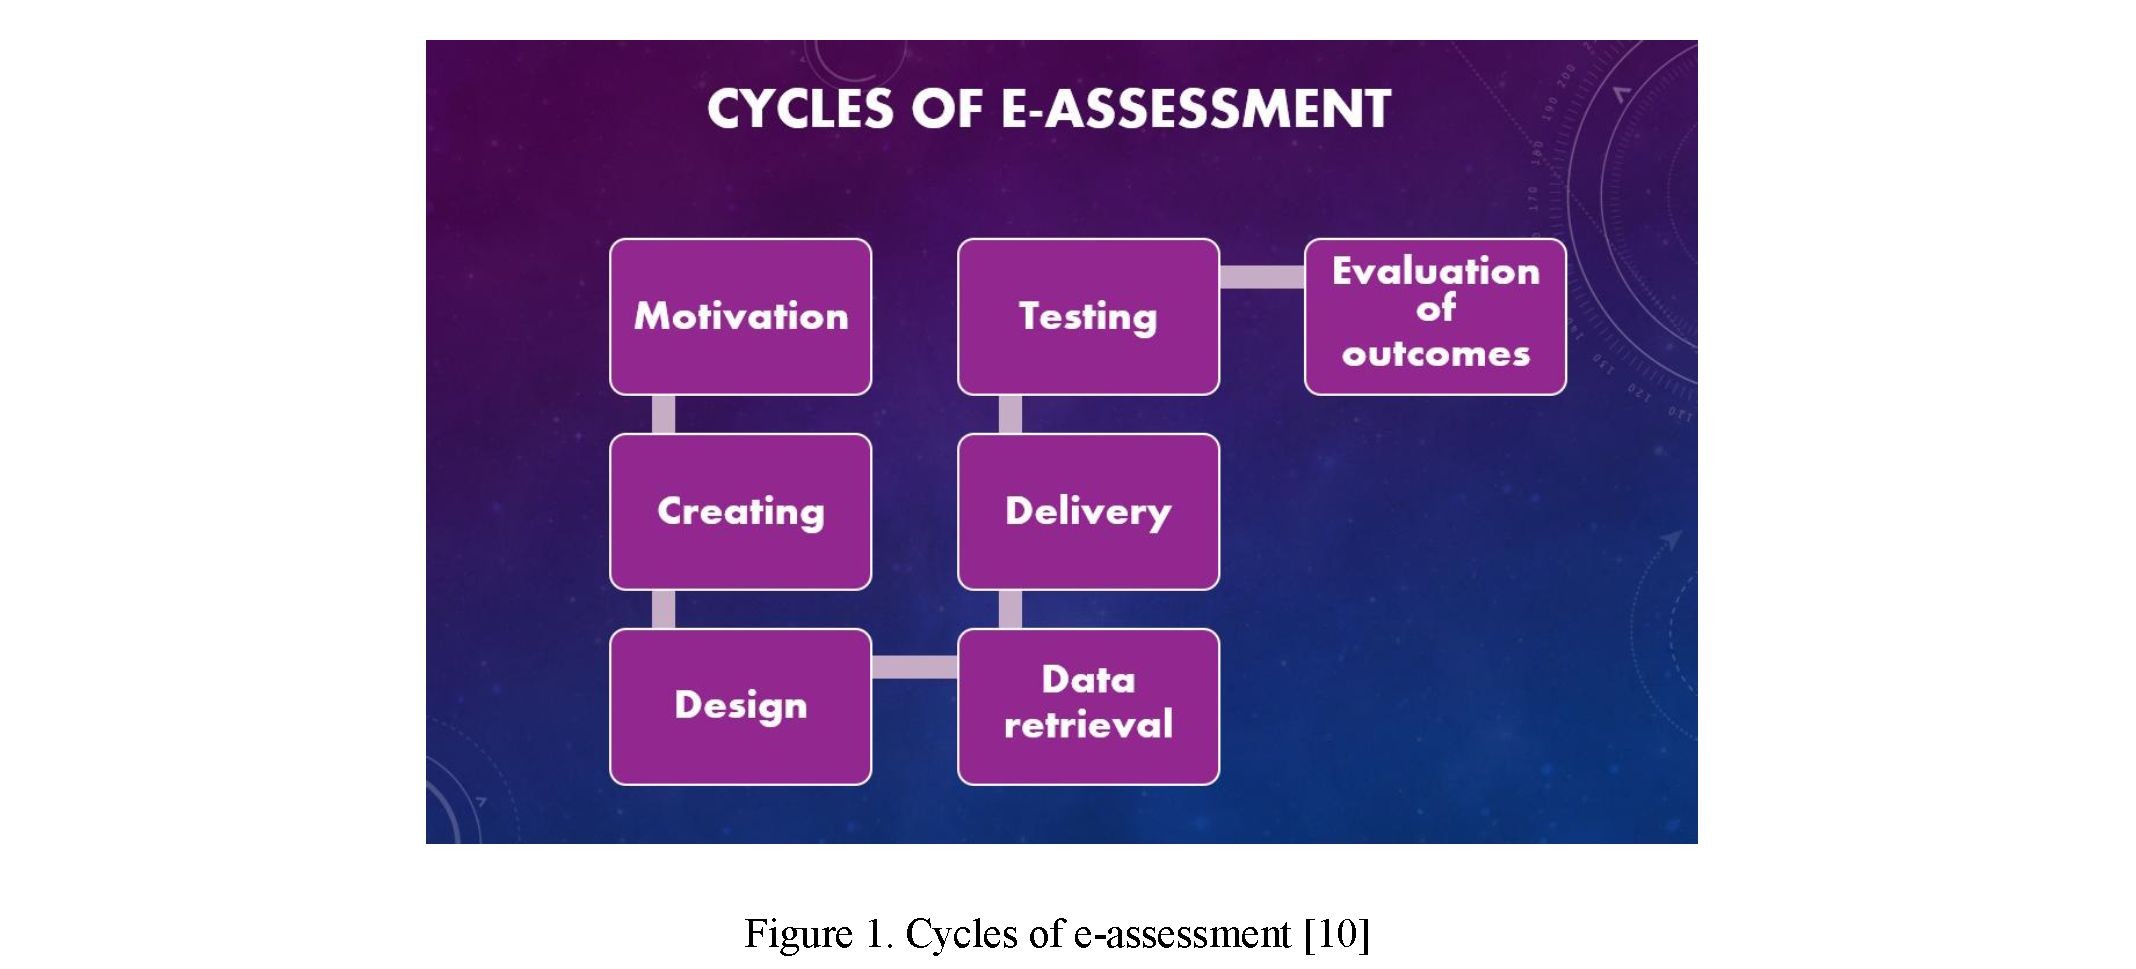 Integration of Digitally-Assisted Assessment in the EFL Classroom